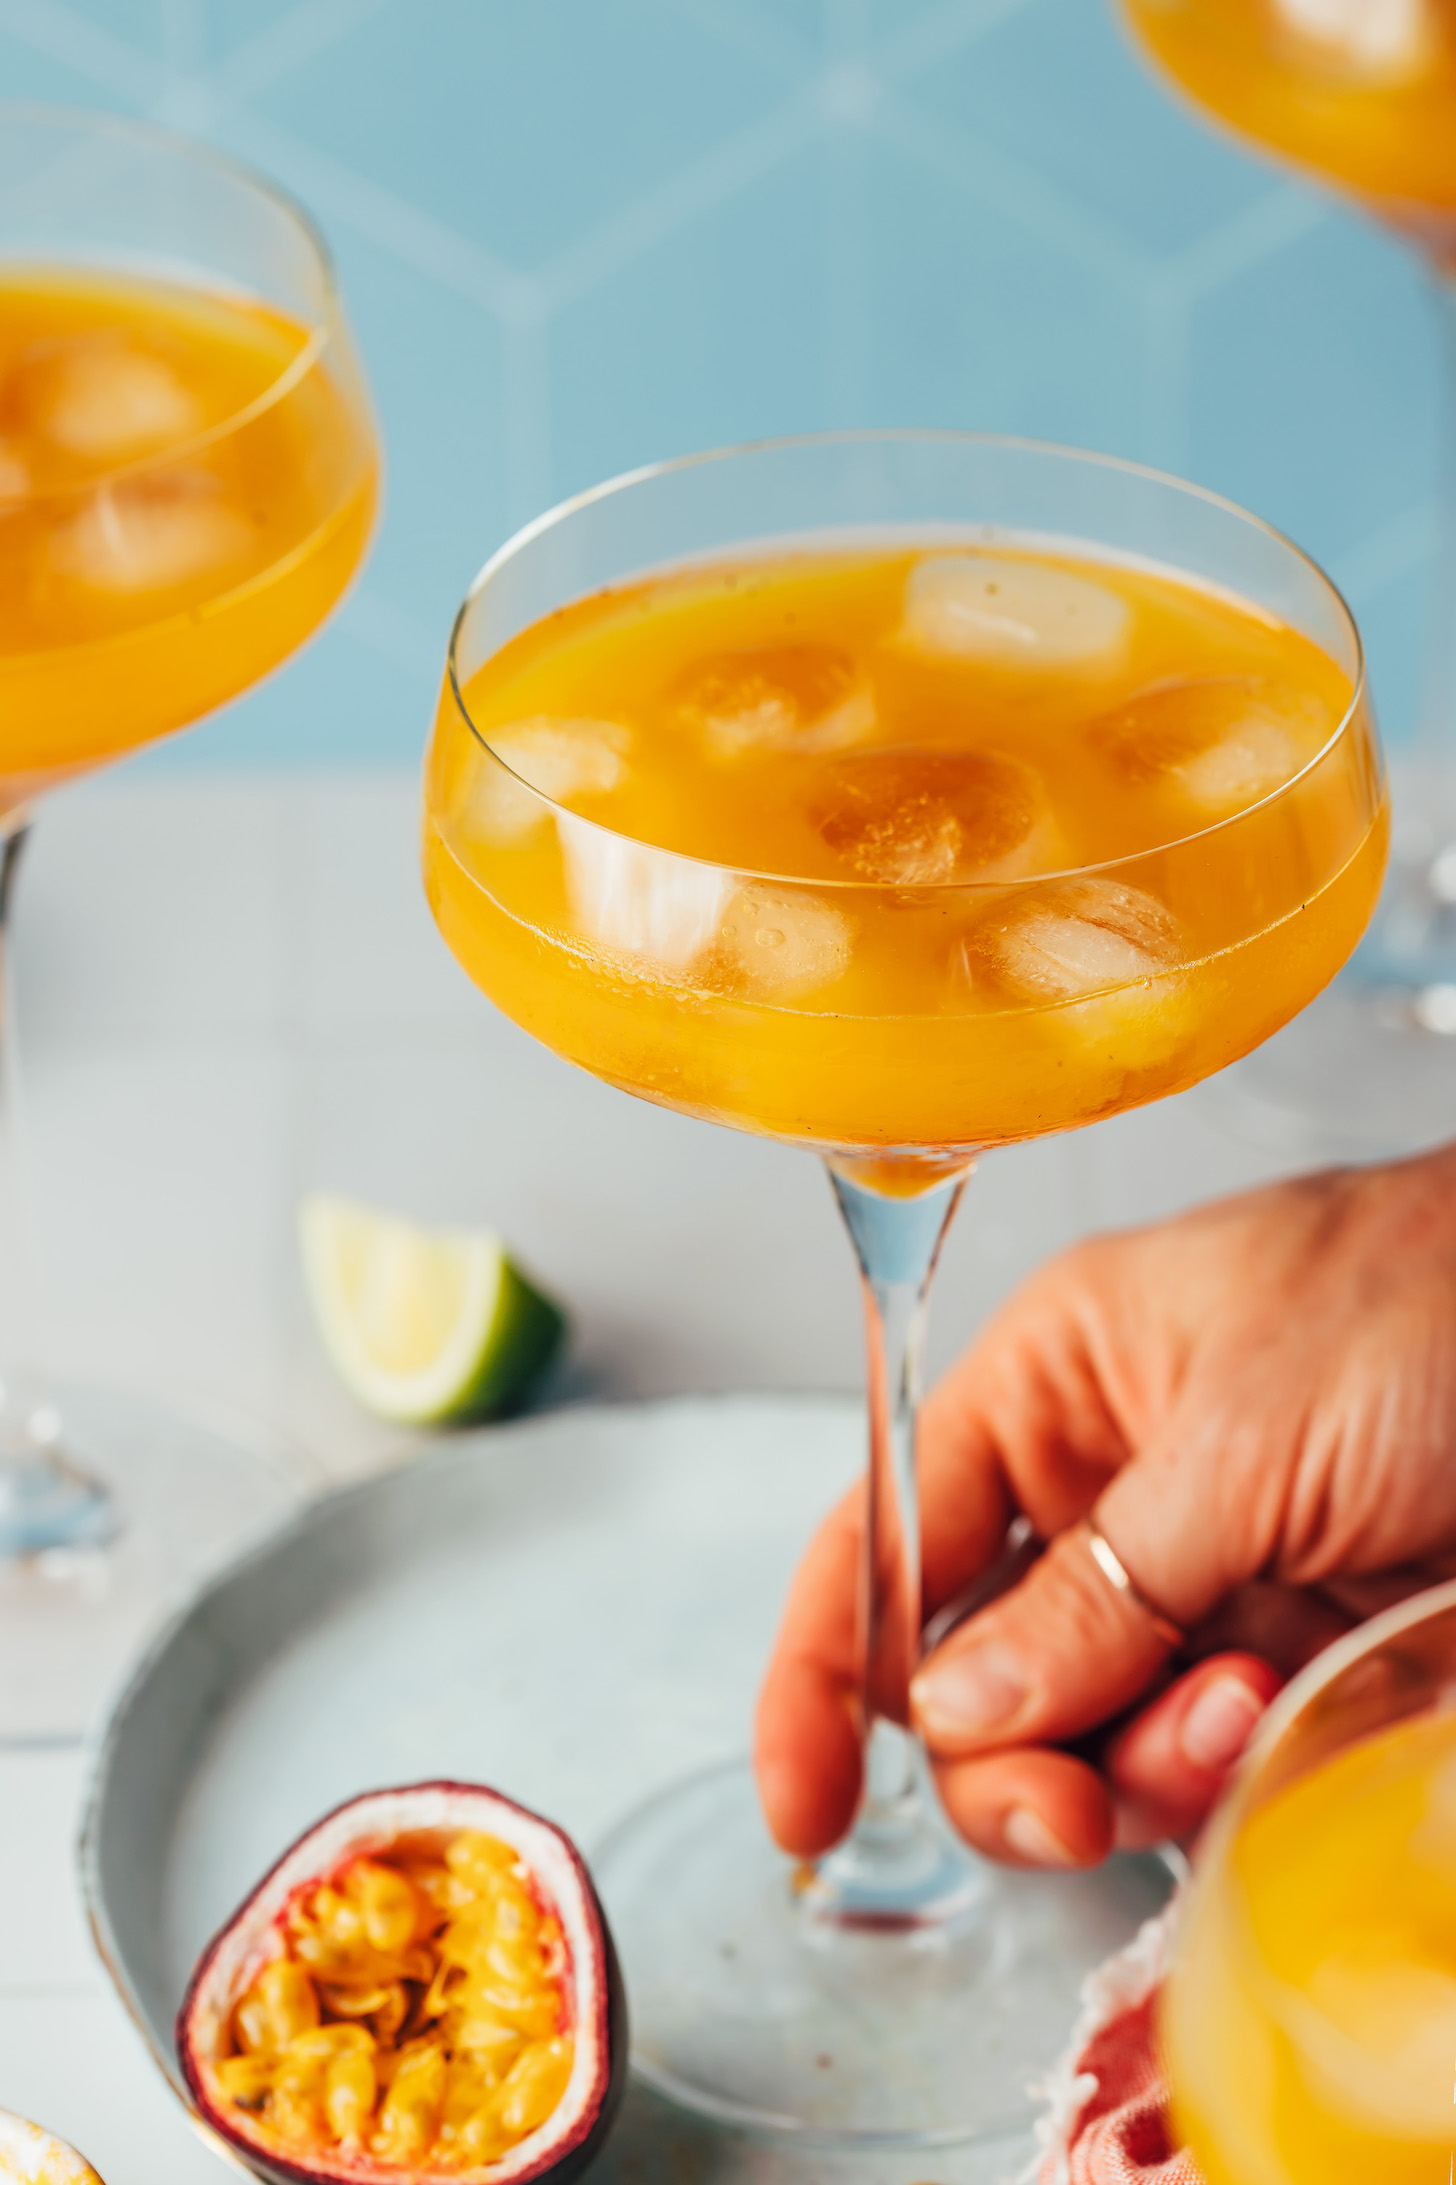 Hand reaching in to pick up a stemmed glass of our passion fruit mocktail recipe